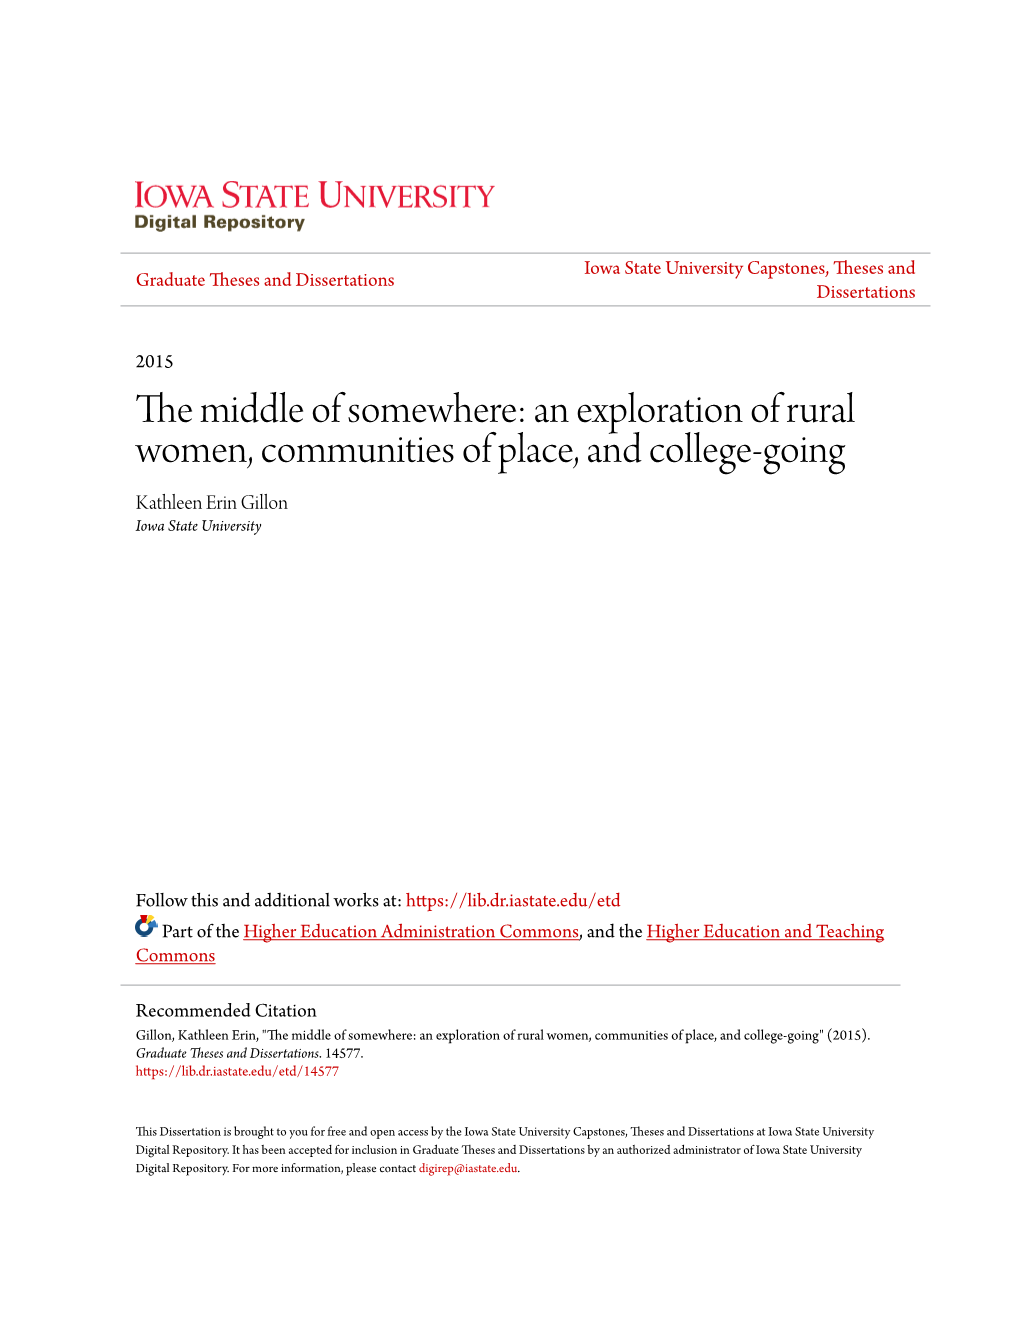 An Exploration of Rural Women, Communities of Place, and College-Going Kathleen Erin Gillon Iowa State University